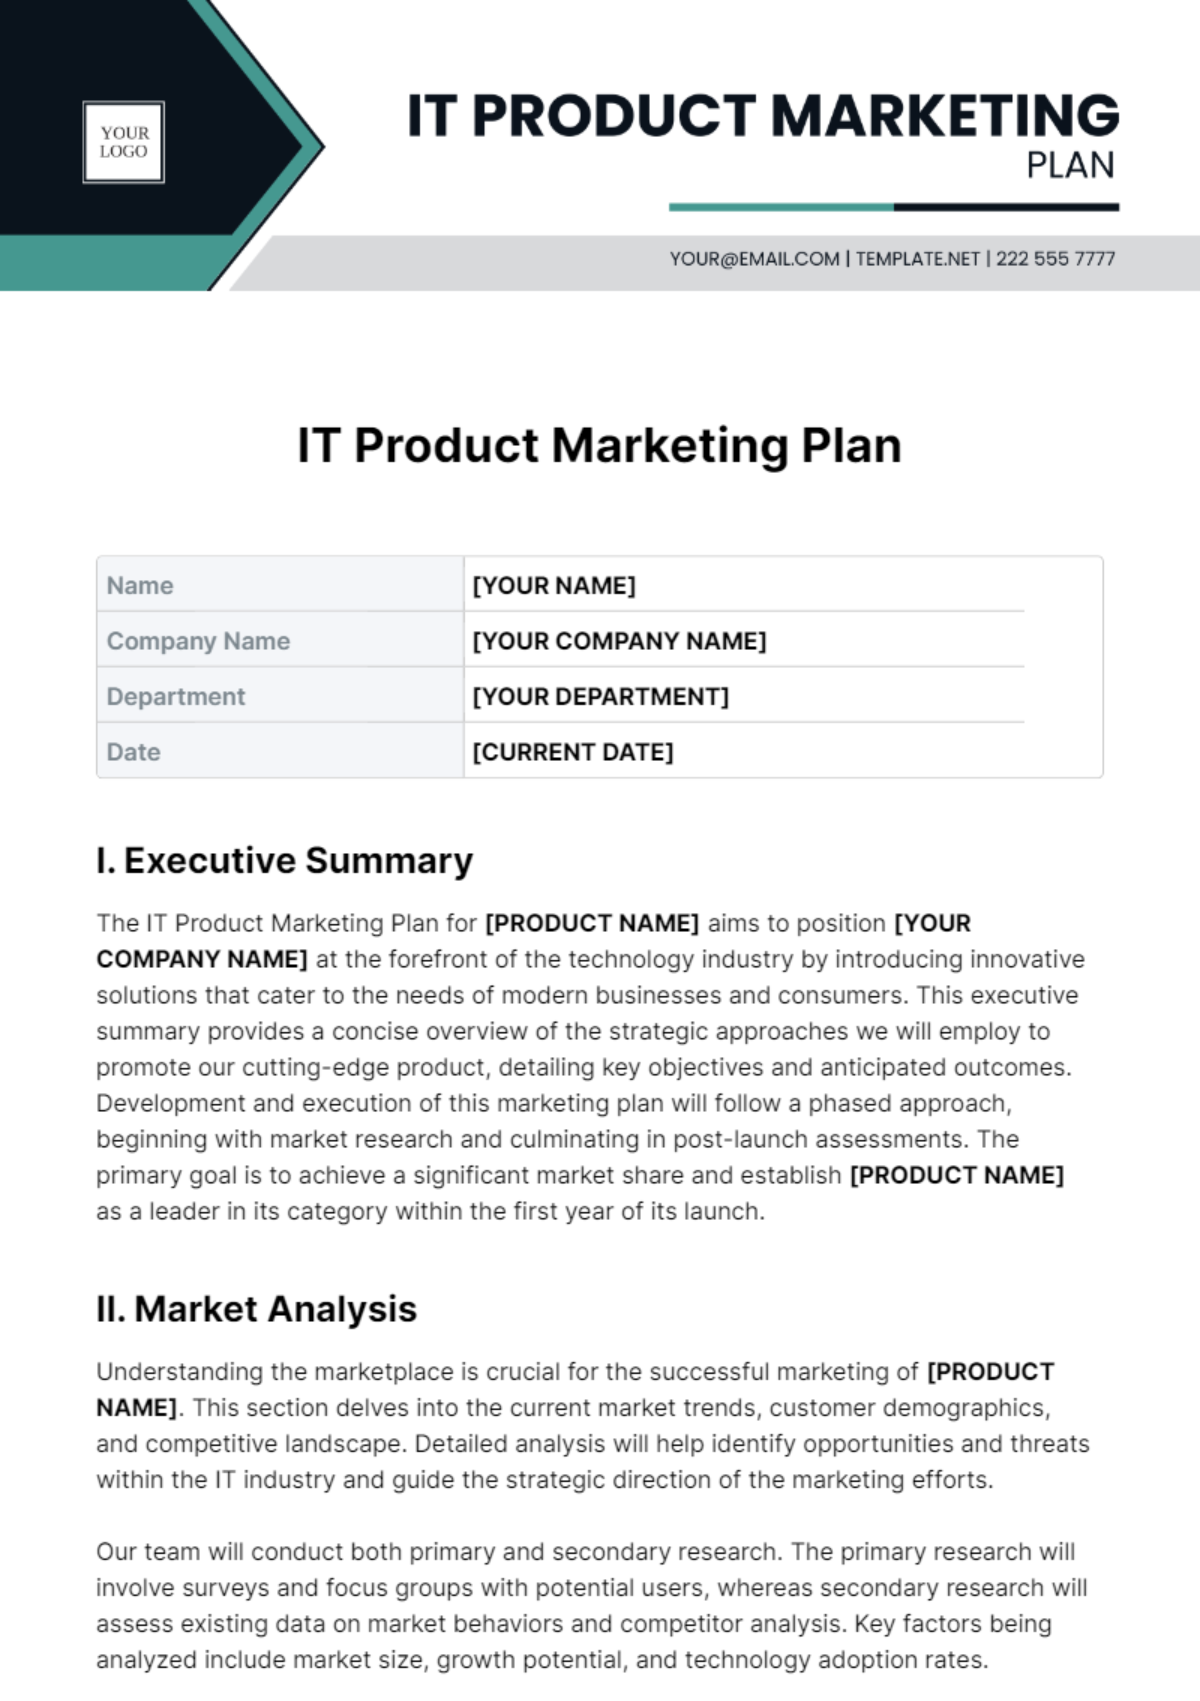 Free IT Product Marketing Plan Template